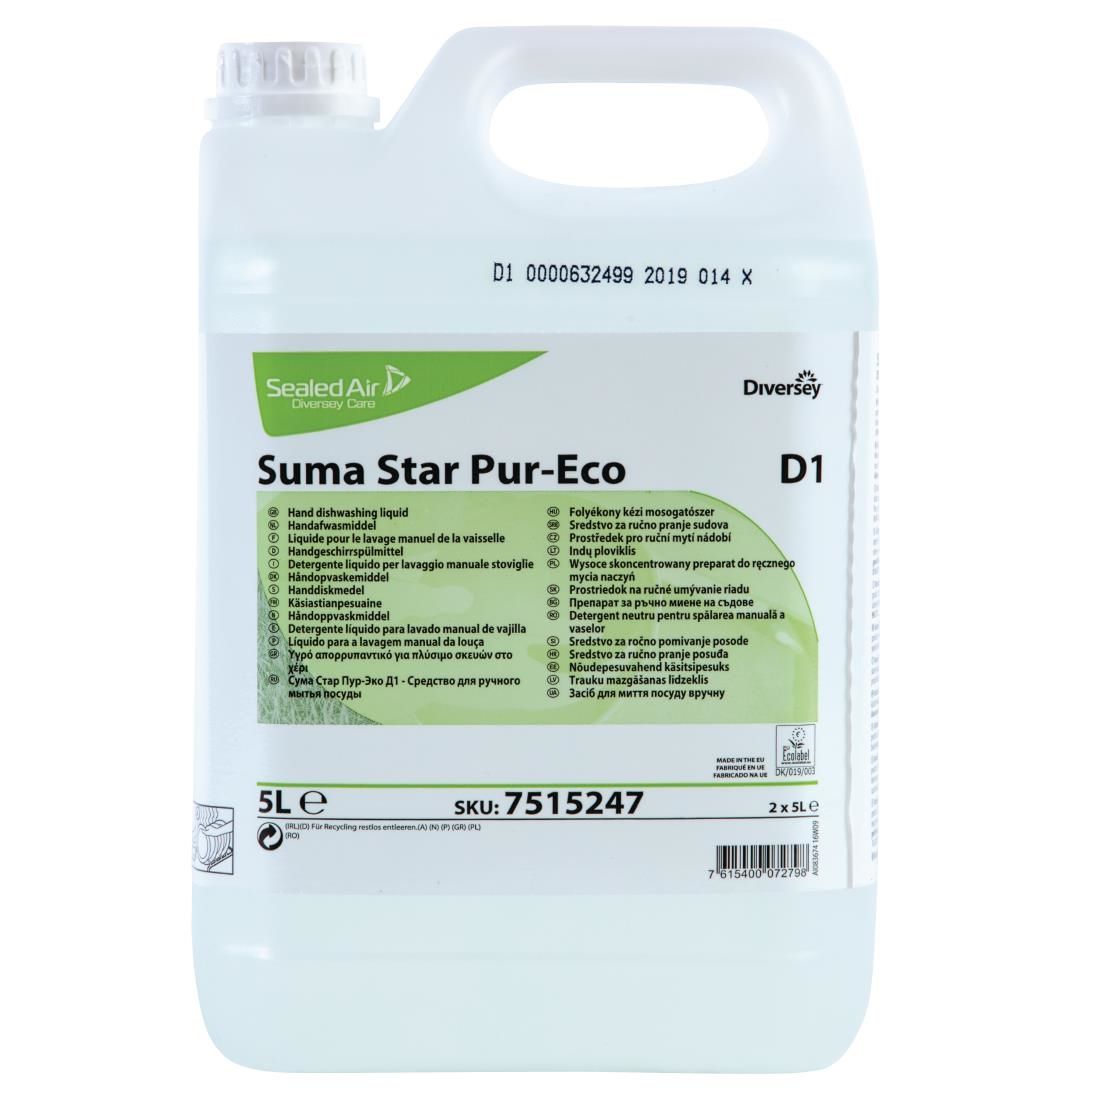 Suma Star D1 Pur-Eco Washing Up Liquid Concentrate 5Ltr (2 Pack) - FA465 Washing Up Liquid Diversey   